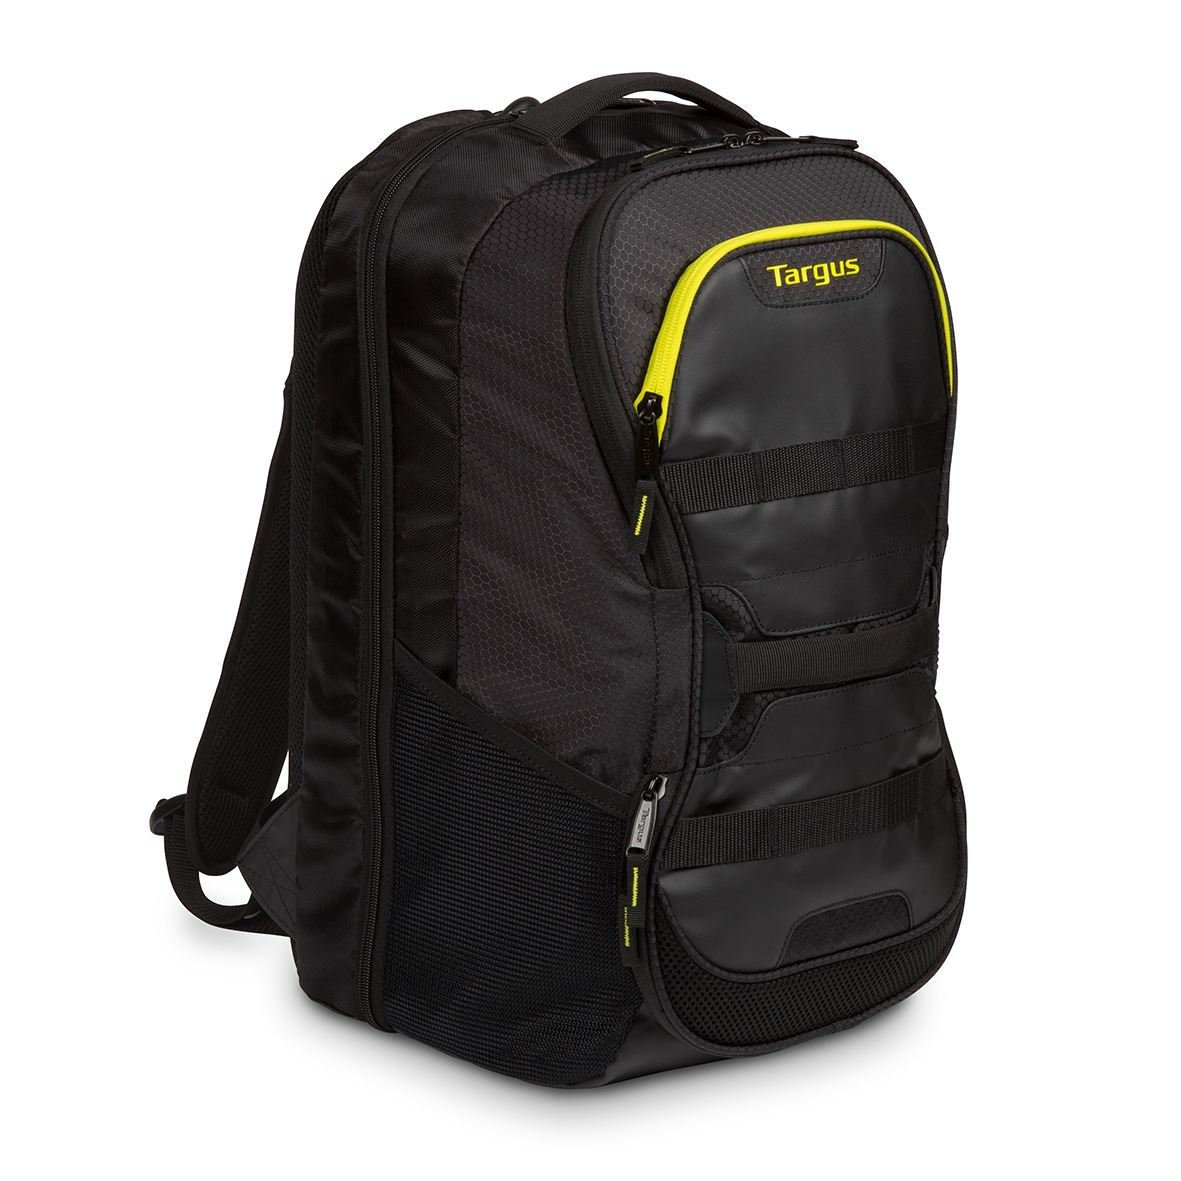 Targus Work + Play Fitness Backpack Black/Yellow Fits Laptop up to 15.6 Inch